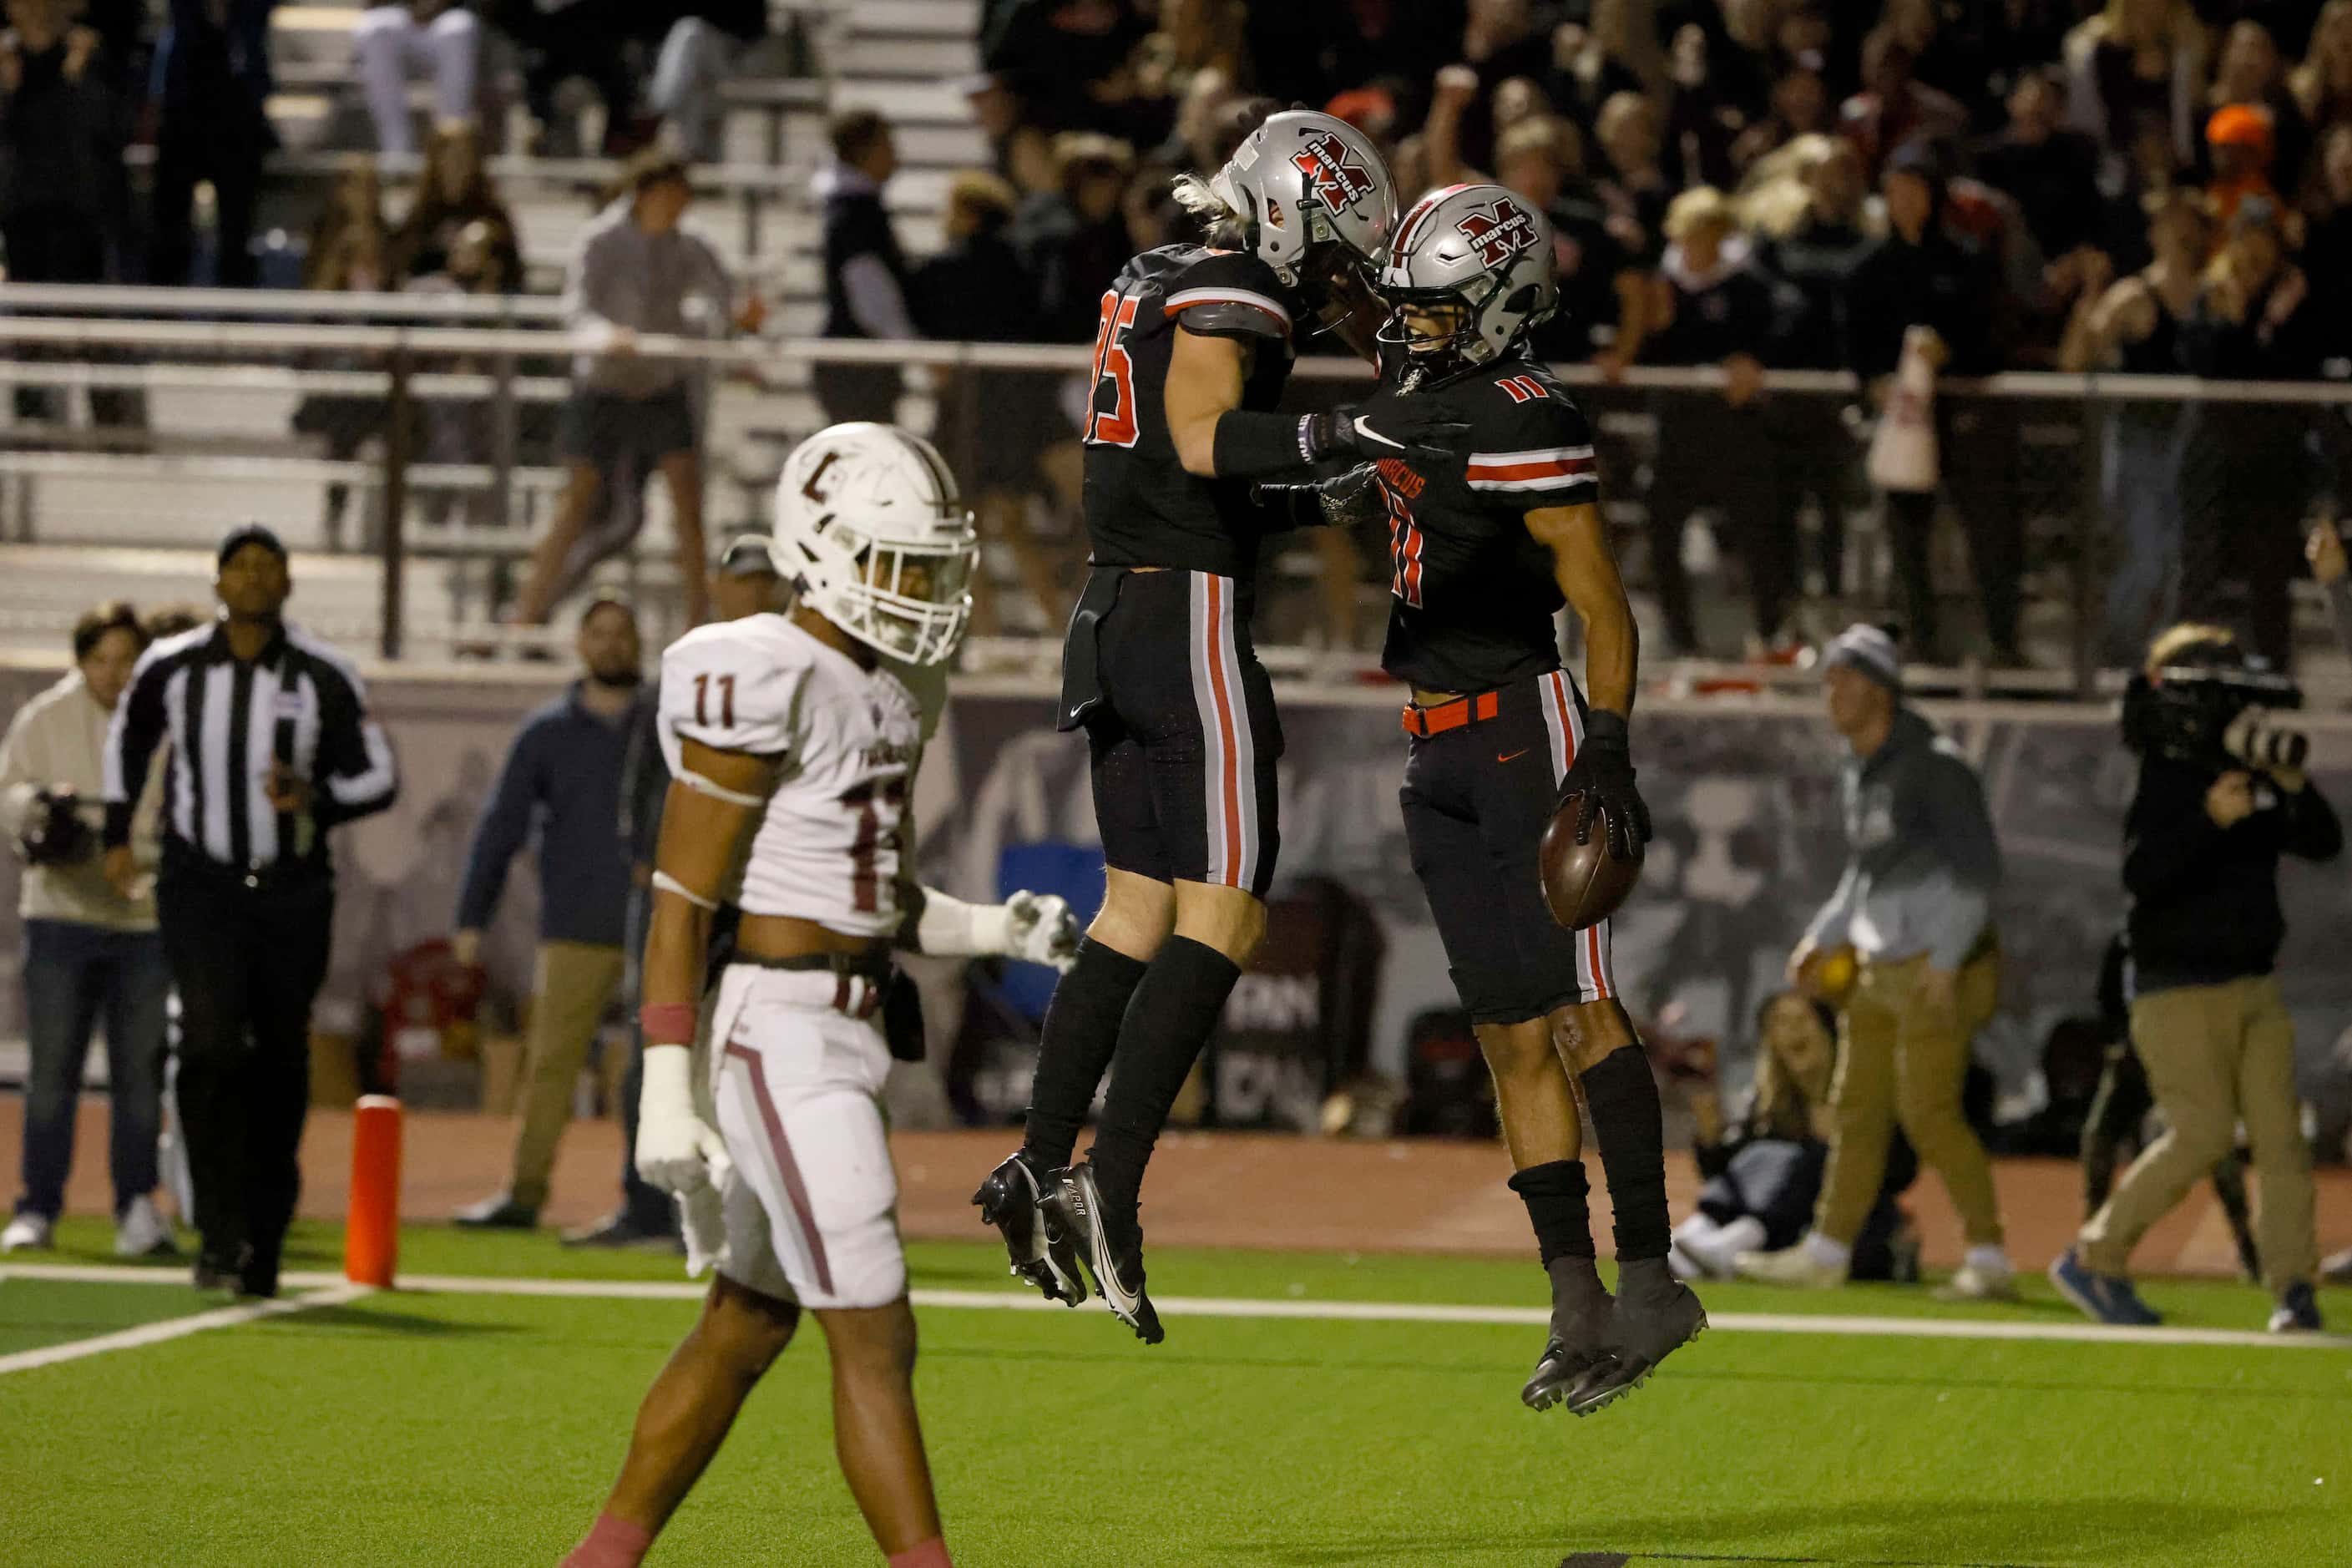 Flower Mound Marcus receiver Dallas Dudley (11), right. celebrates his touchdown against...